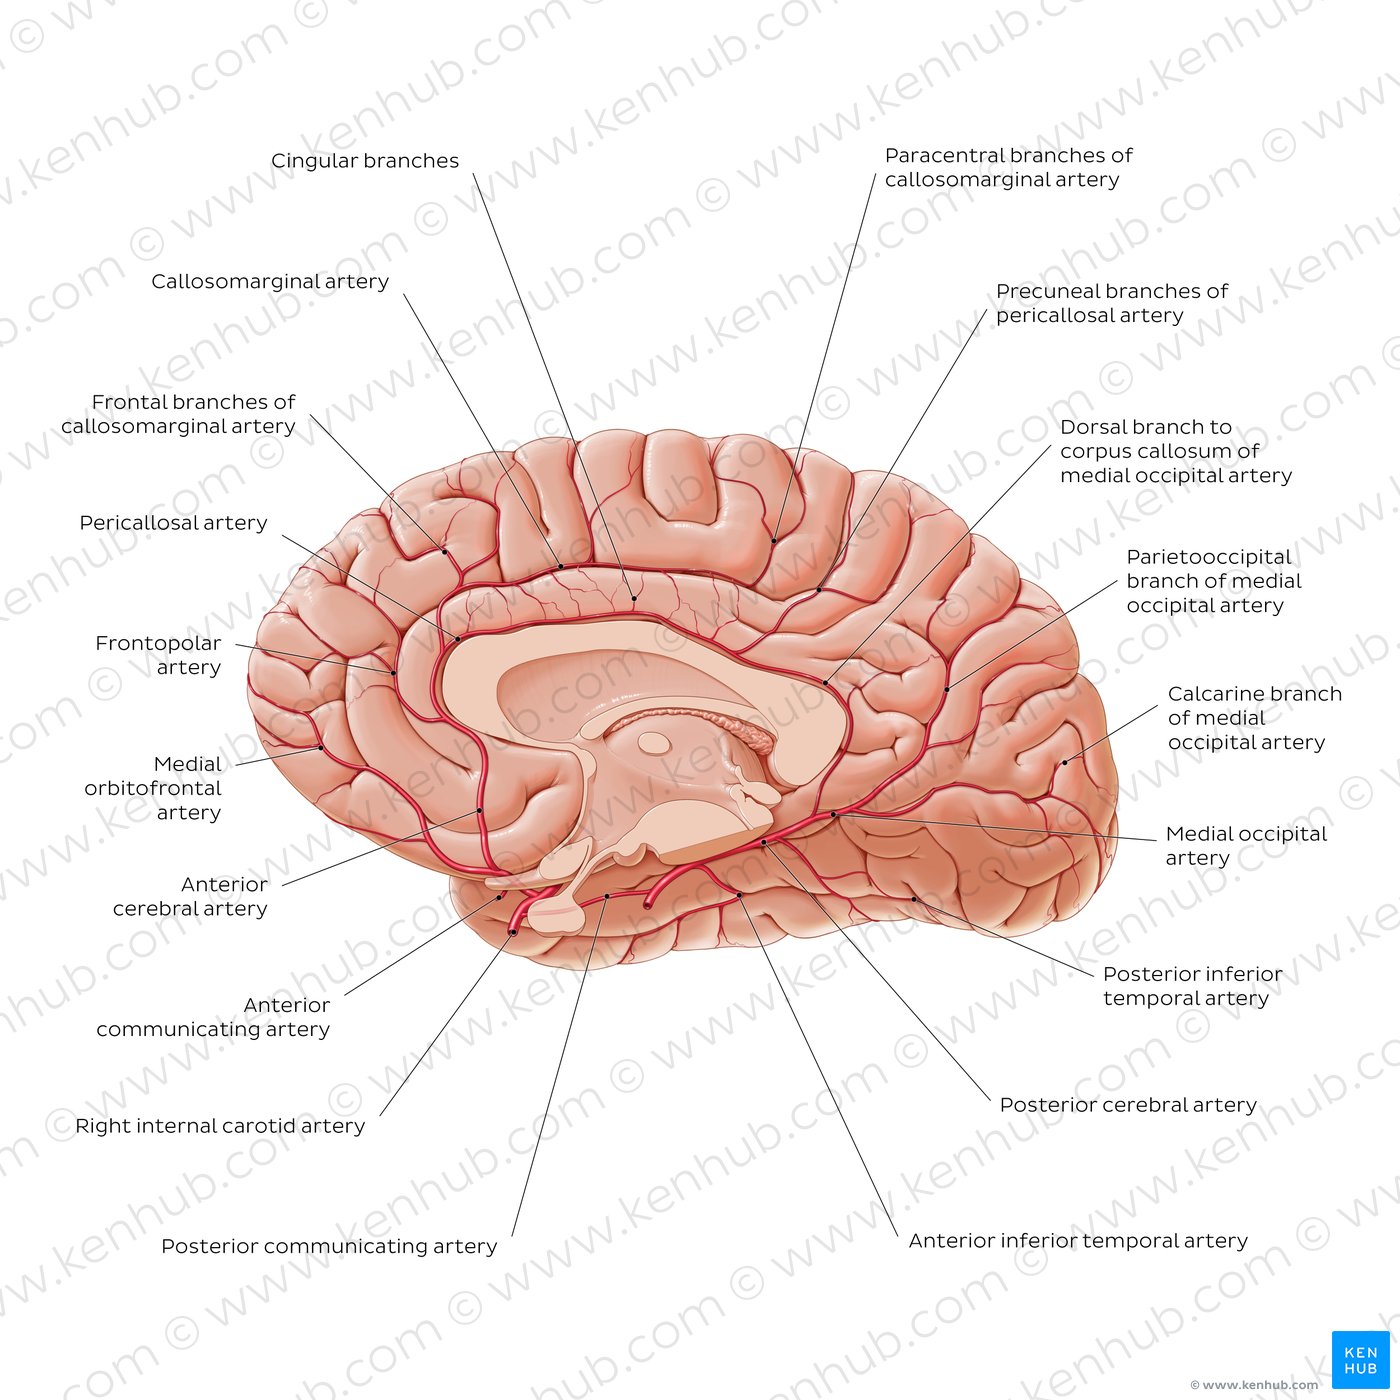 Blood supply to the corpus callosum and surrounding structures